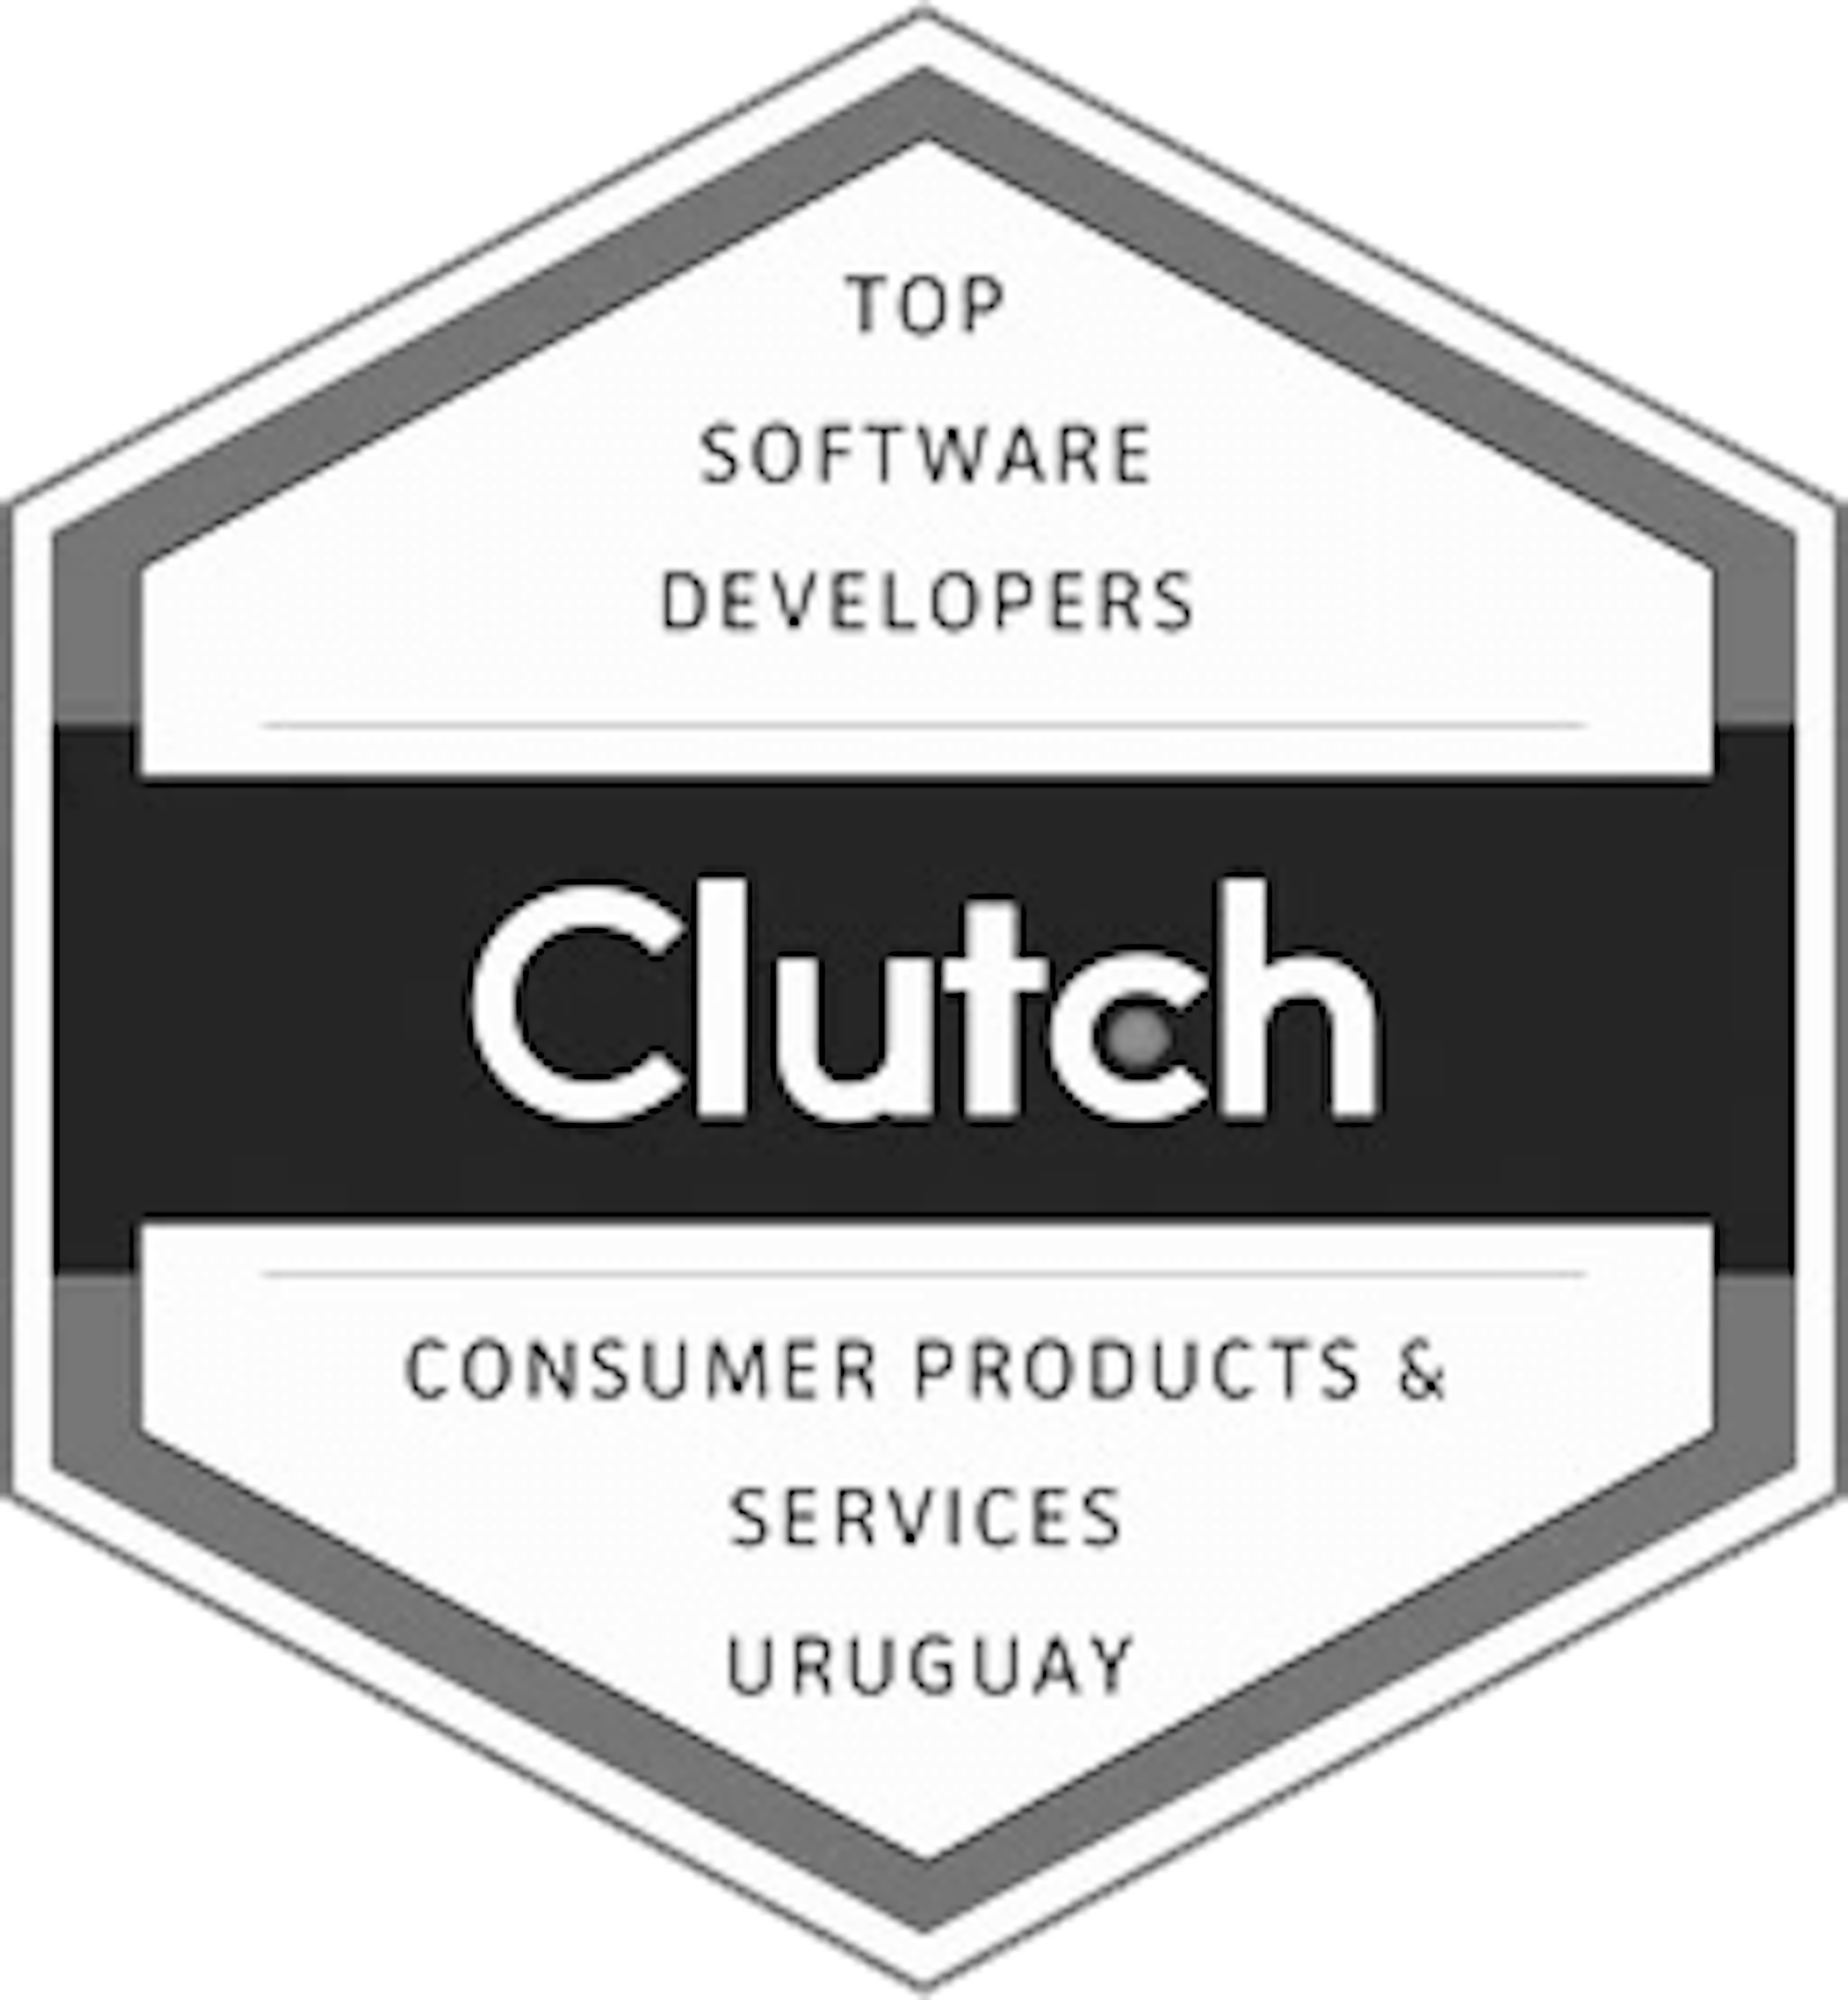 Top Software Developers - Consumer Products & Services Uruguay